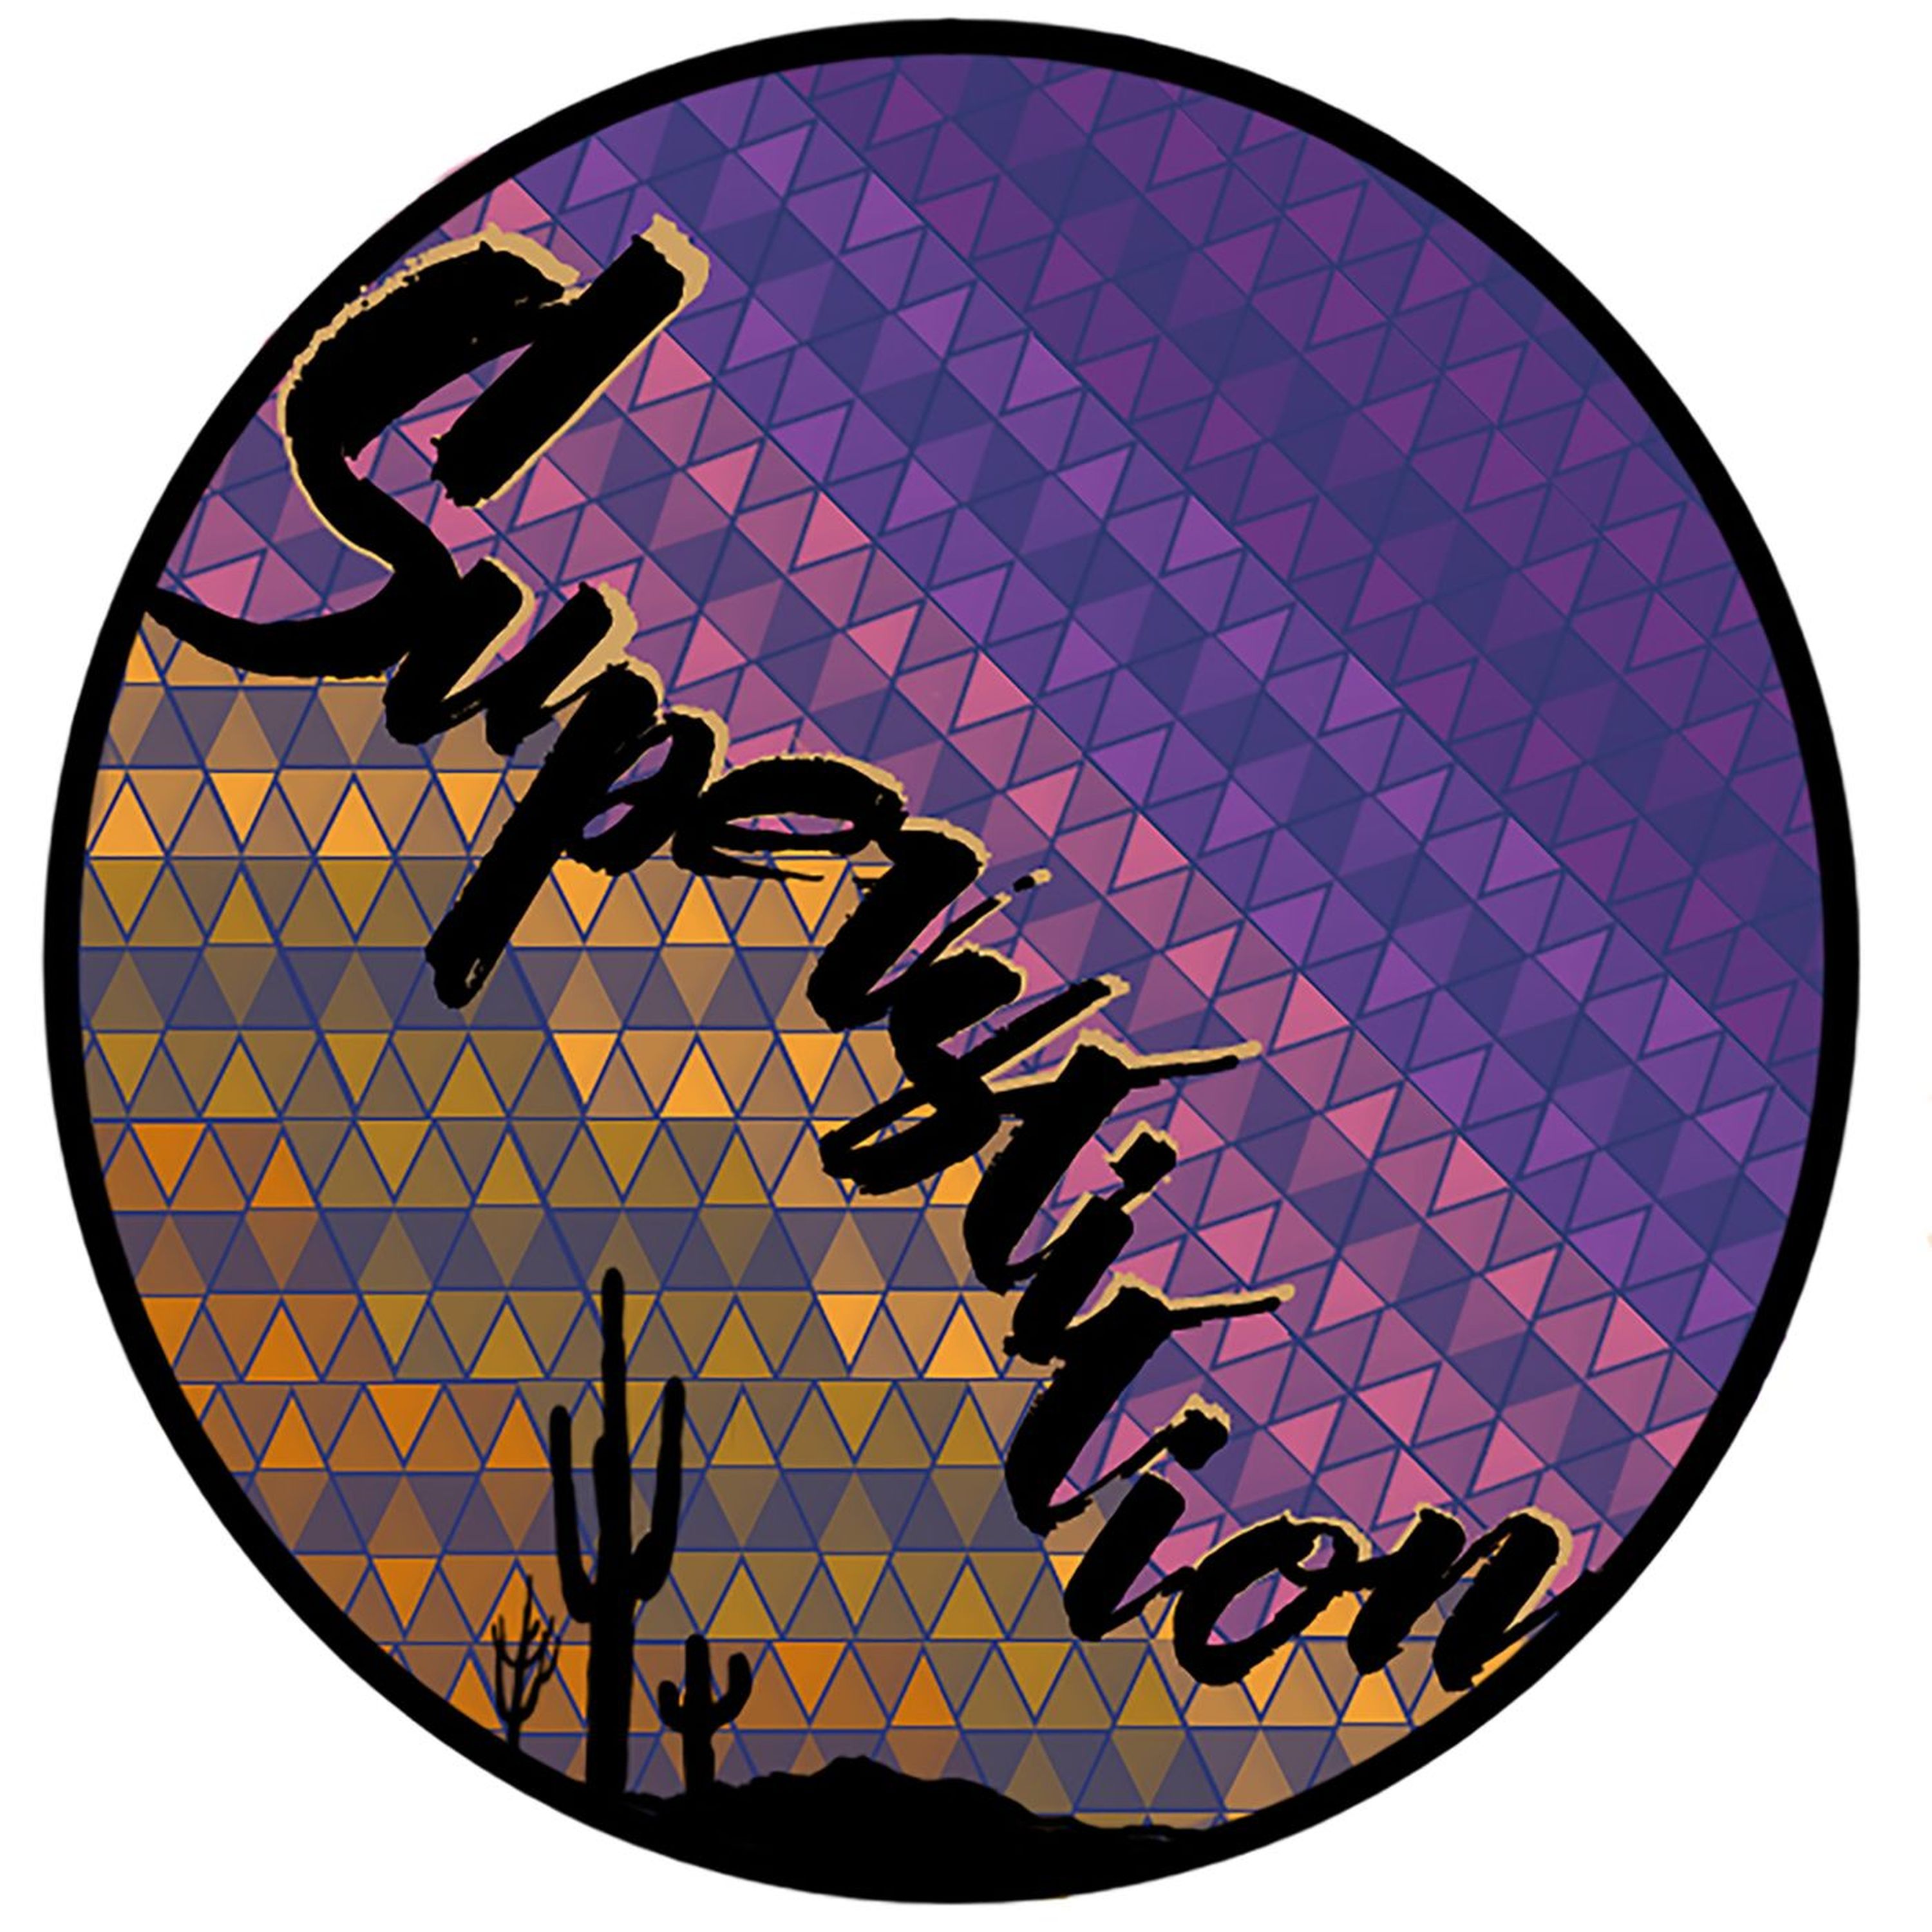 Superstition - Episode One - Welcome to Superstition